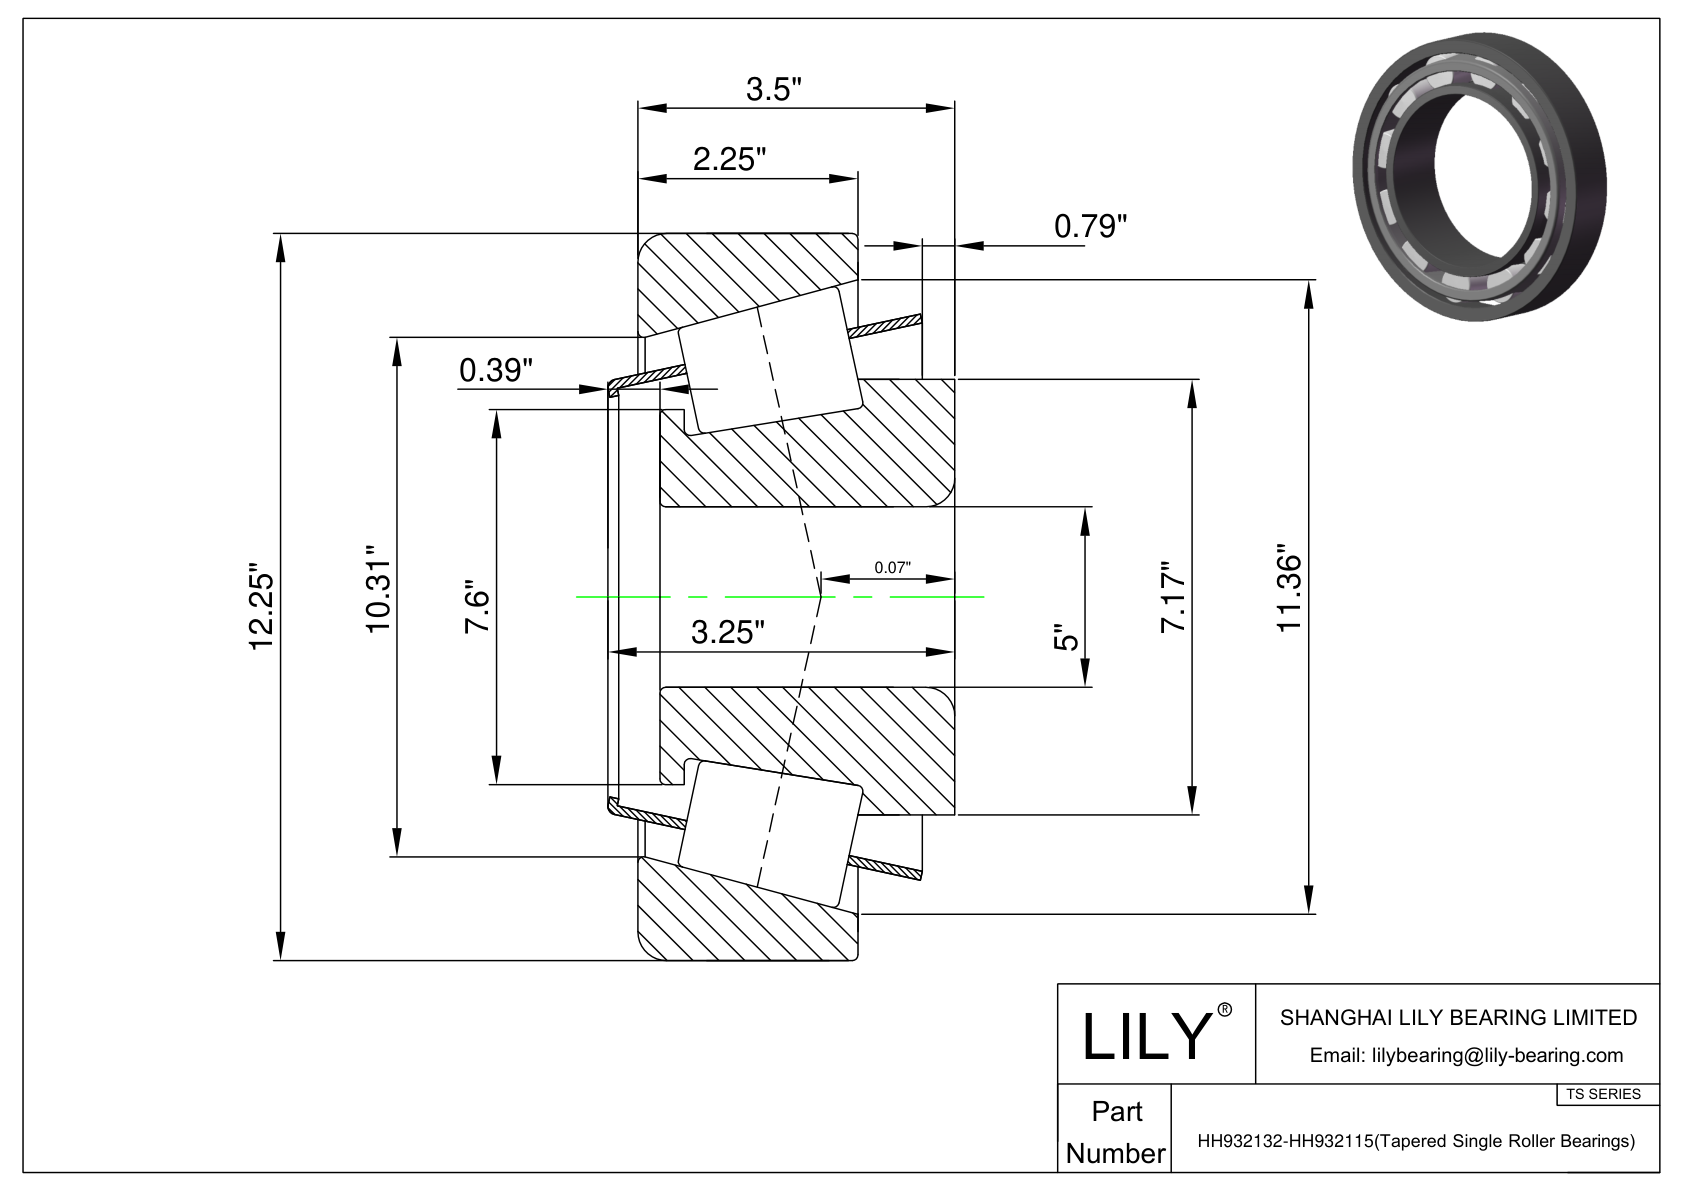 HH932132-HH932115 TS (Tapered Single Roller Bearings) (Imperial) cad drawing